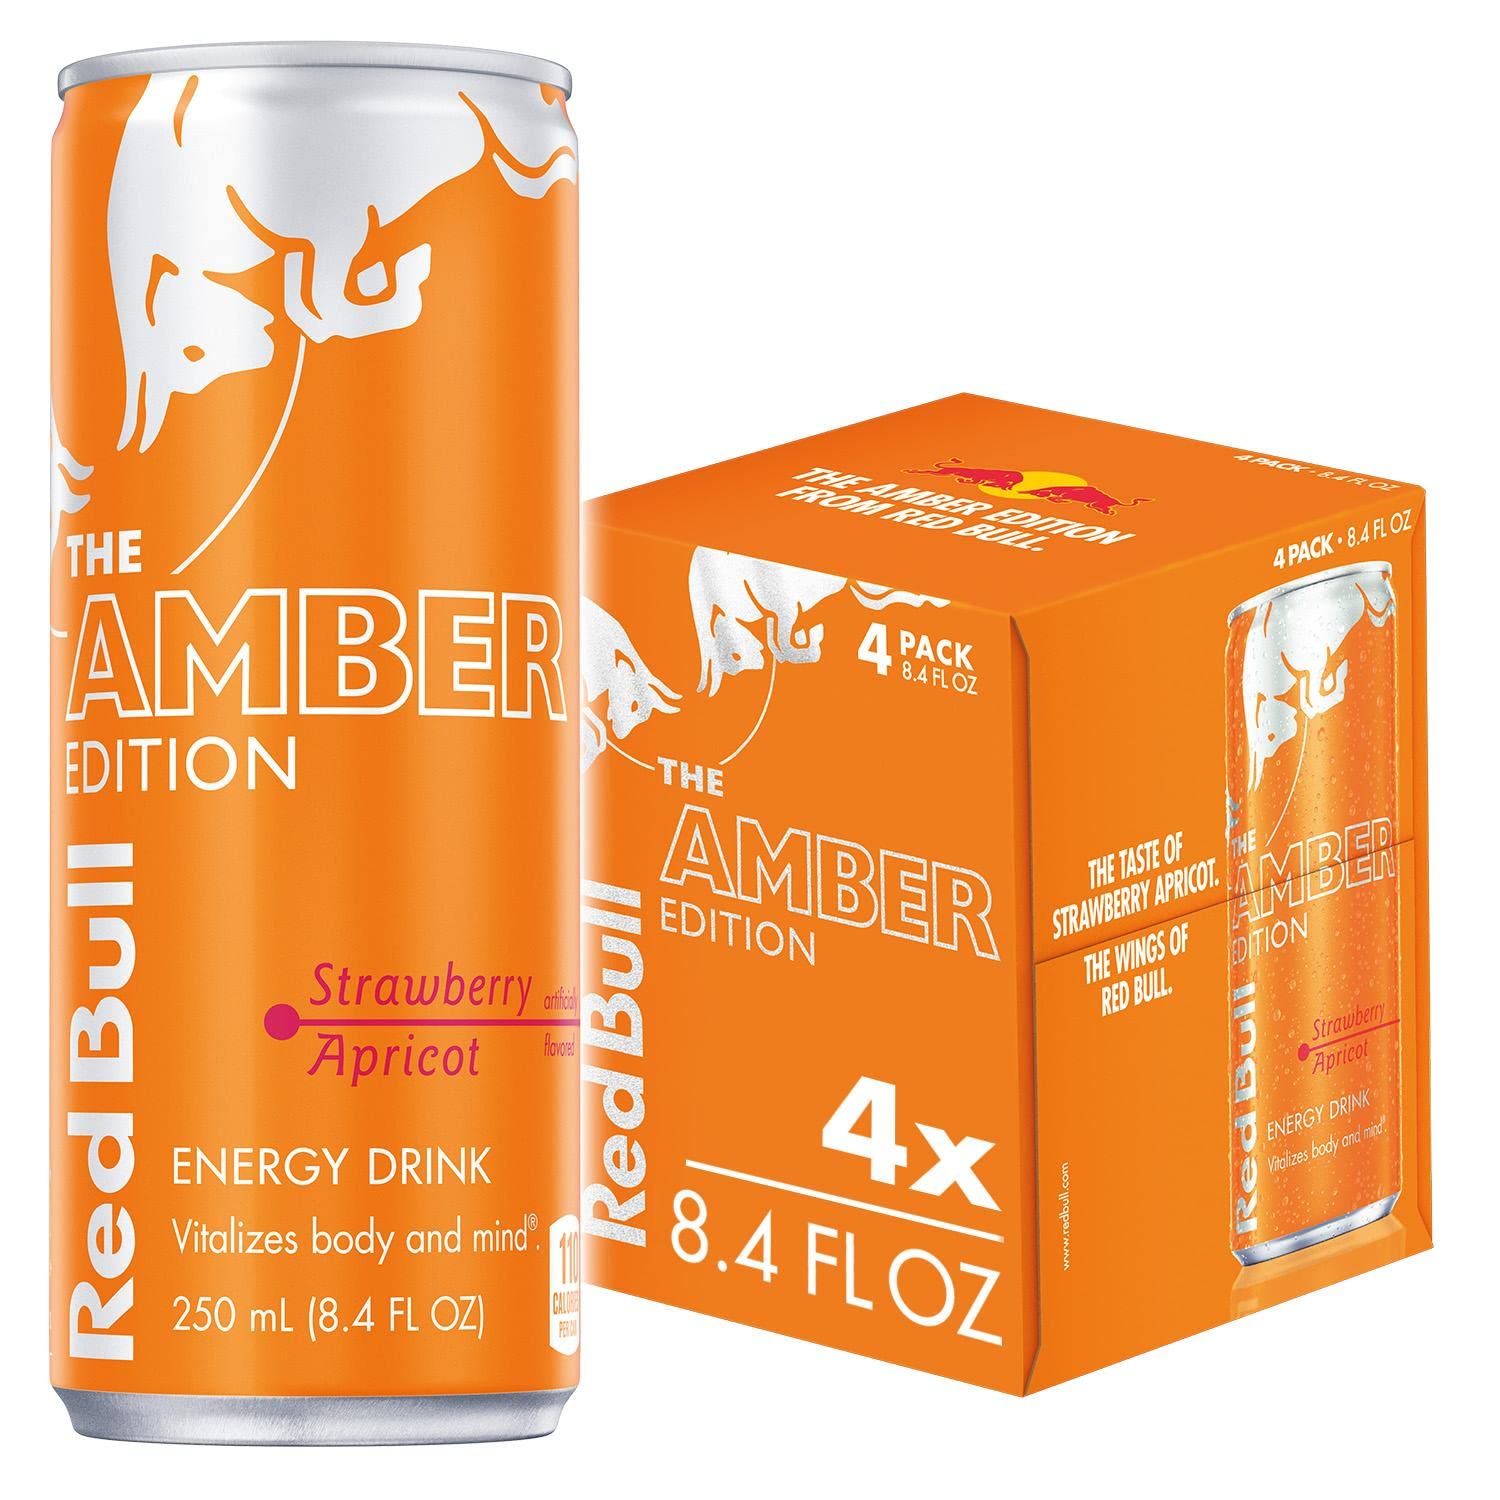 Red Bull Amber Edition Strawberry Apricot Energy Drink, 8.4 Fl Oz, 4 Cans $3.33